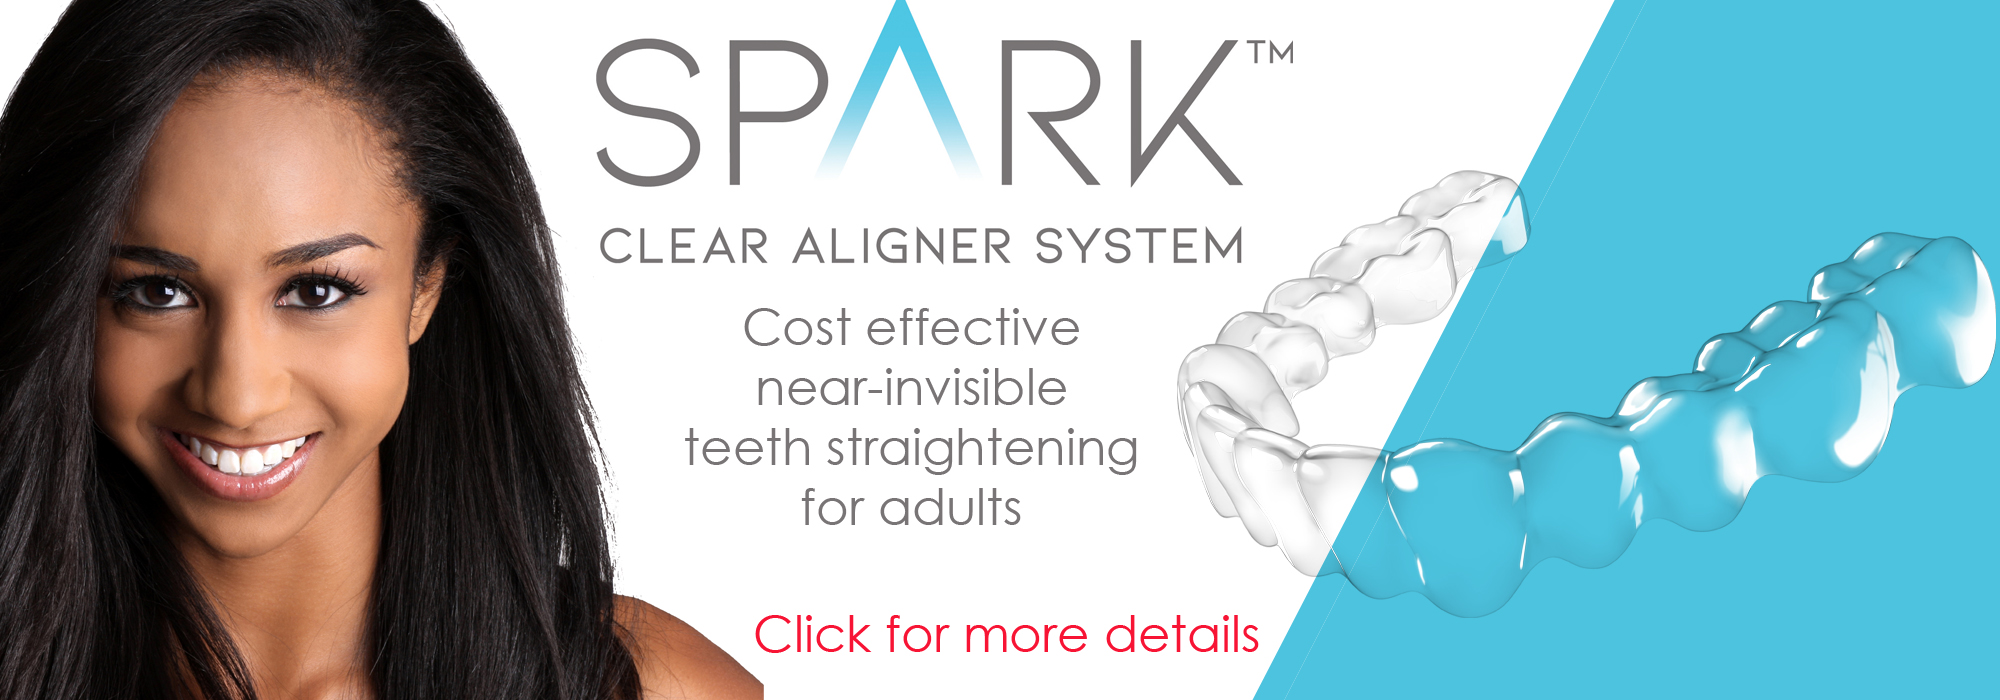 Photo of a beautiful smiling woman alongside a clear orthodontic aligner with the caption Spark clear aligner system, cost effective near-invisible teeth straightening for adults.  Click for more details